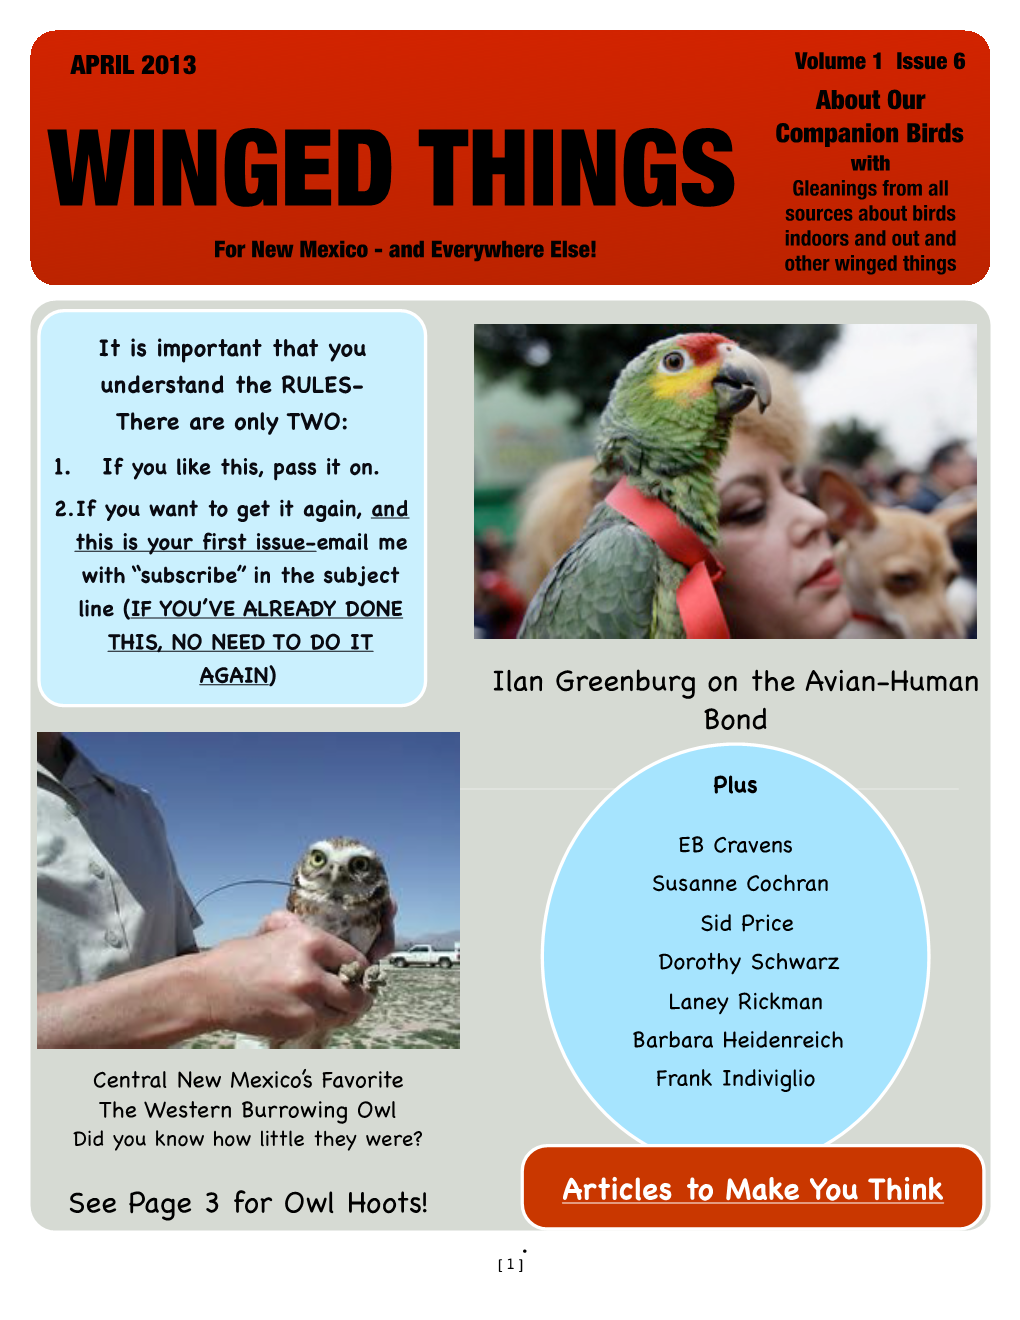 Winged Things 6 April